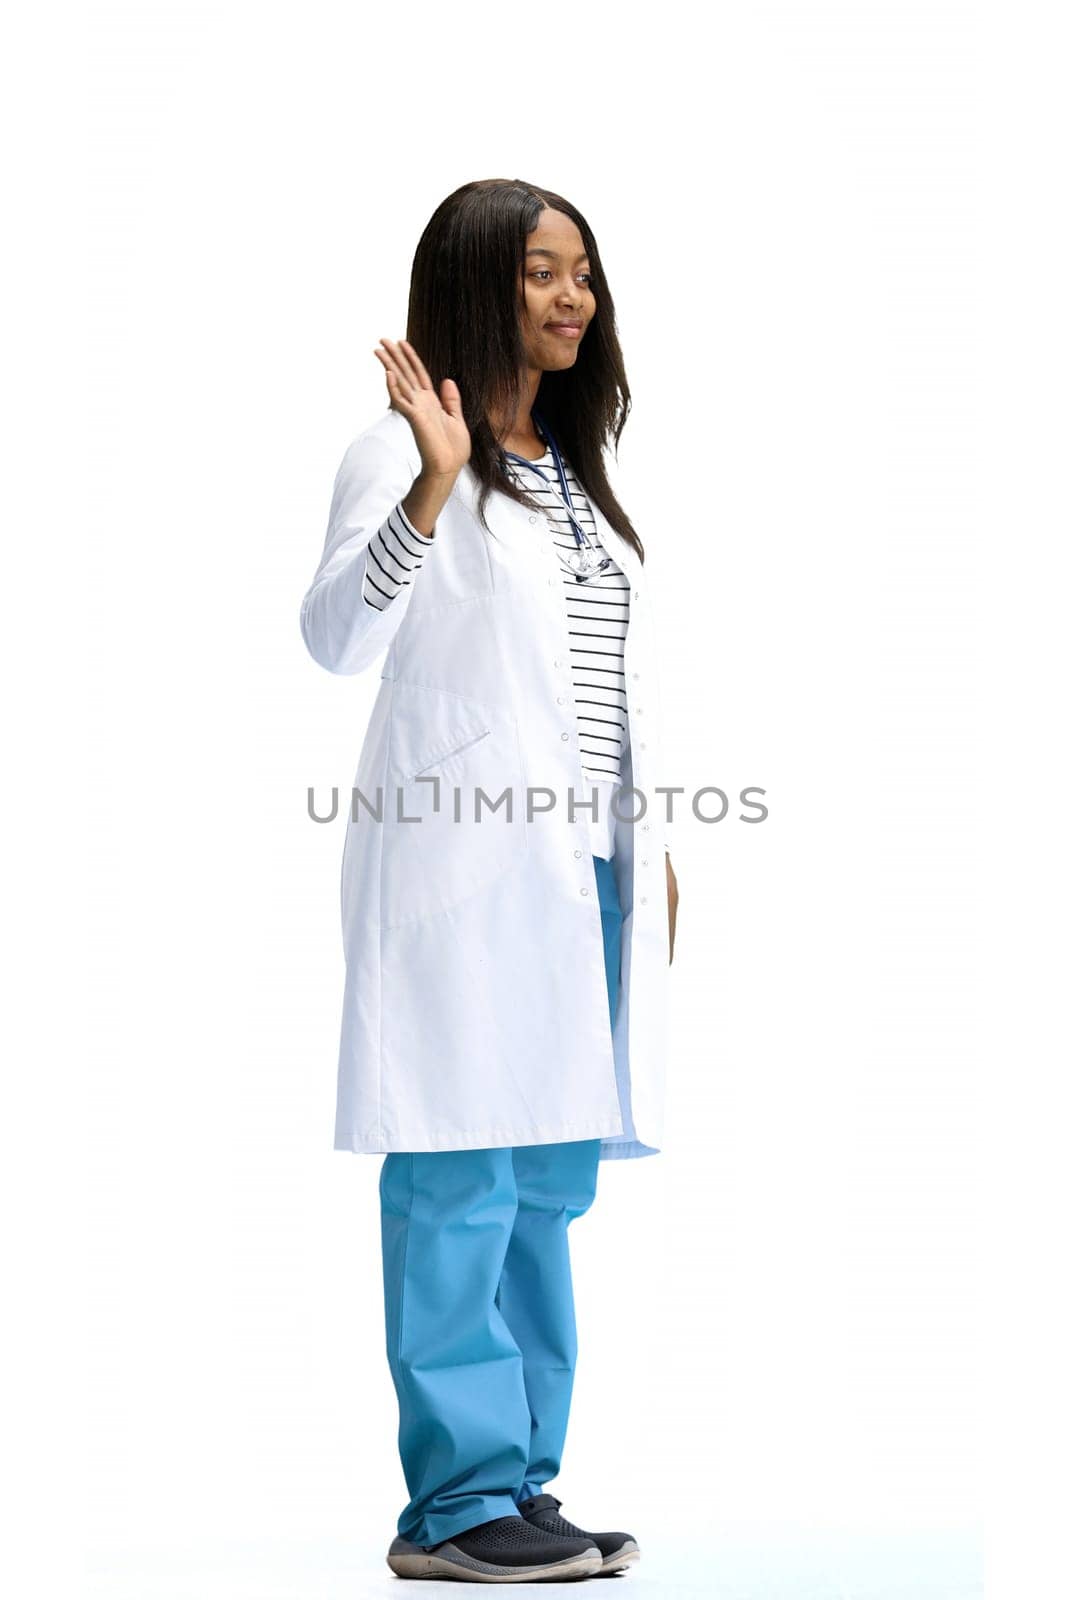 A female doctor, on a white background, in full height, waving her hand.